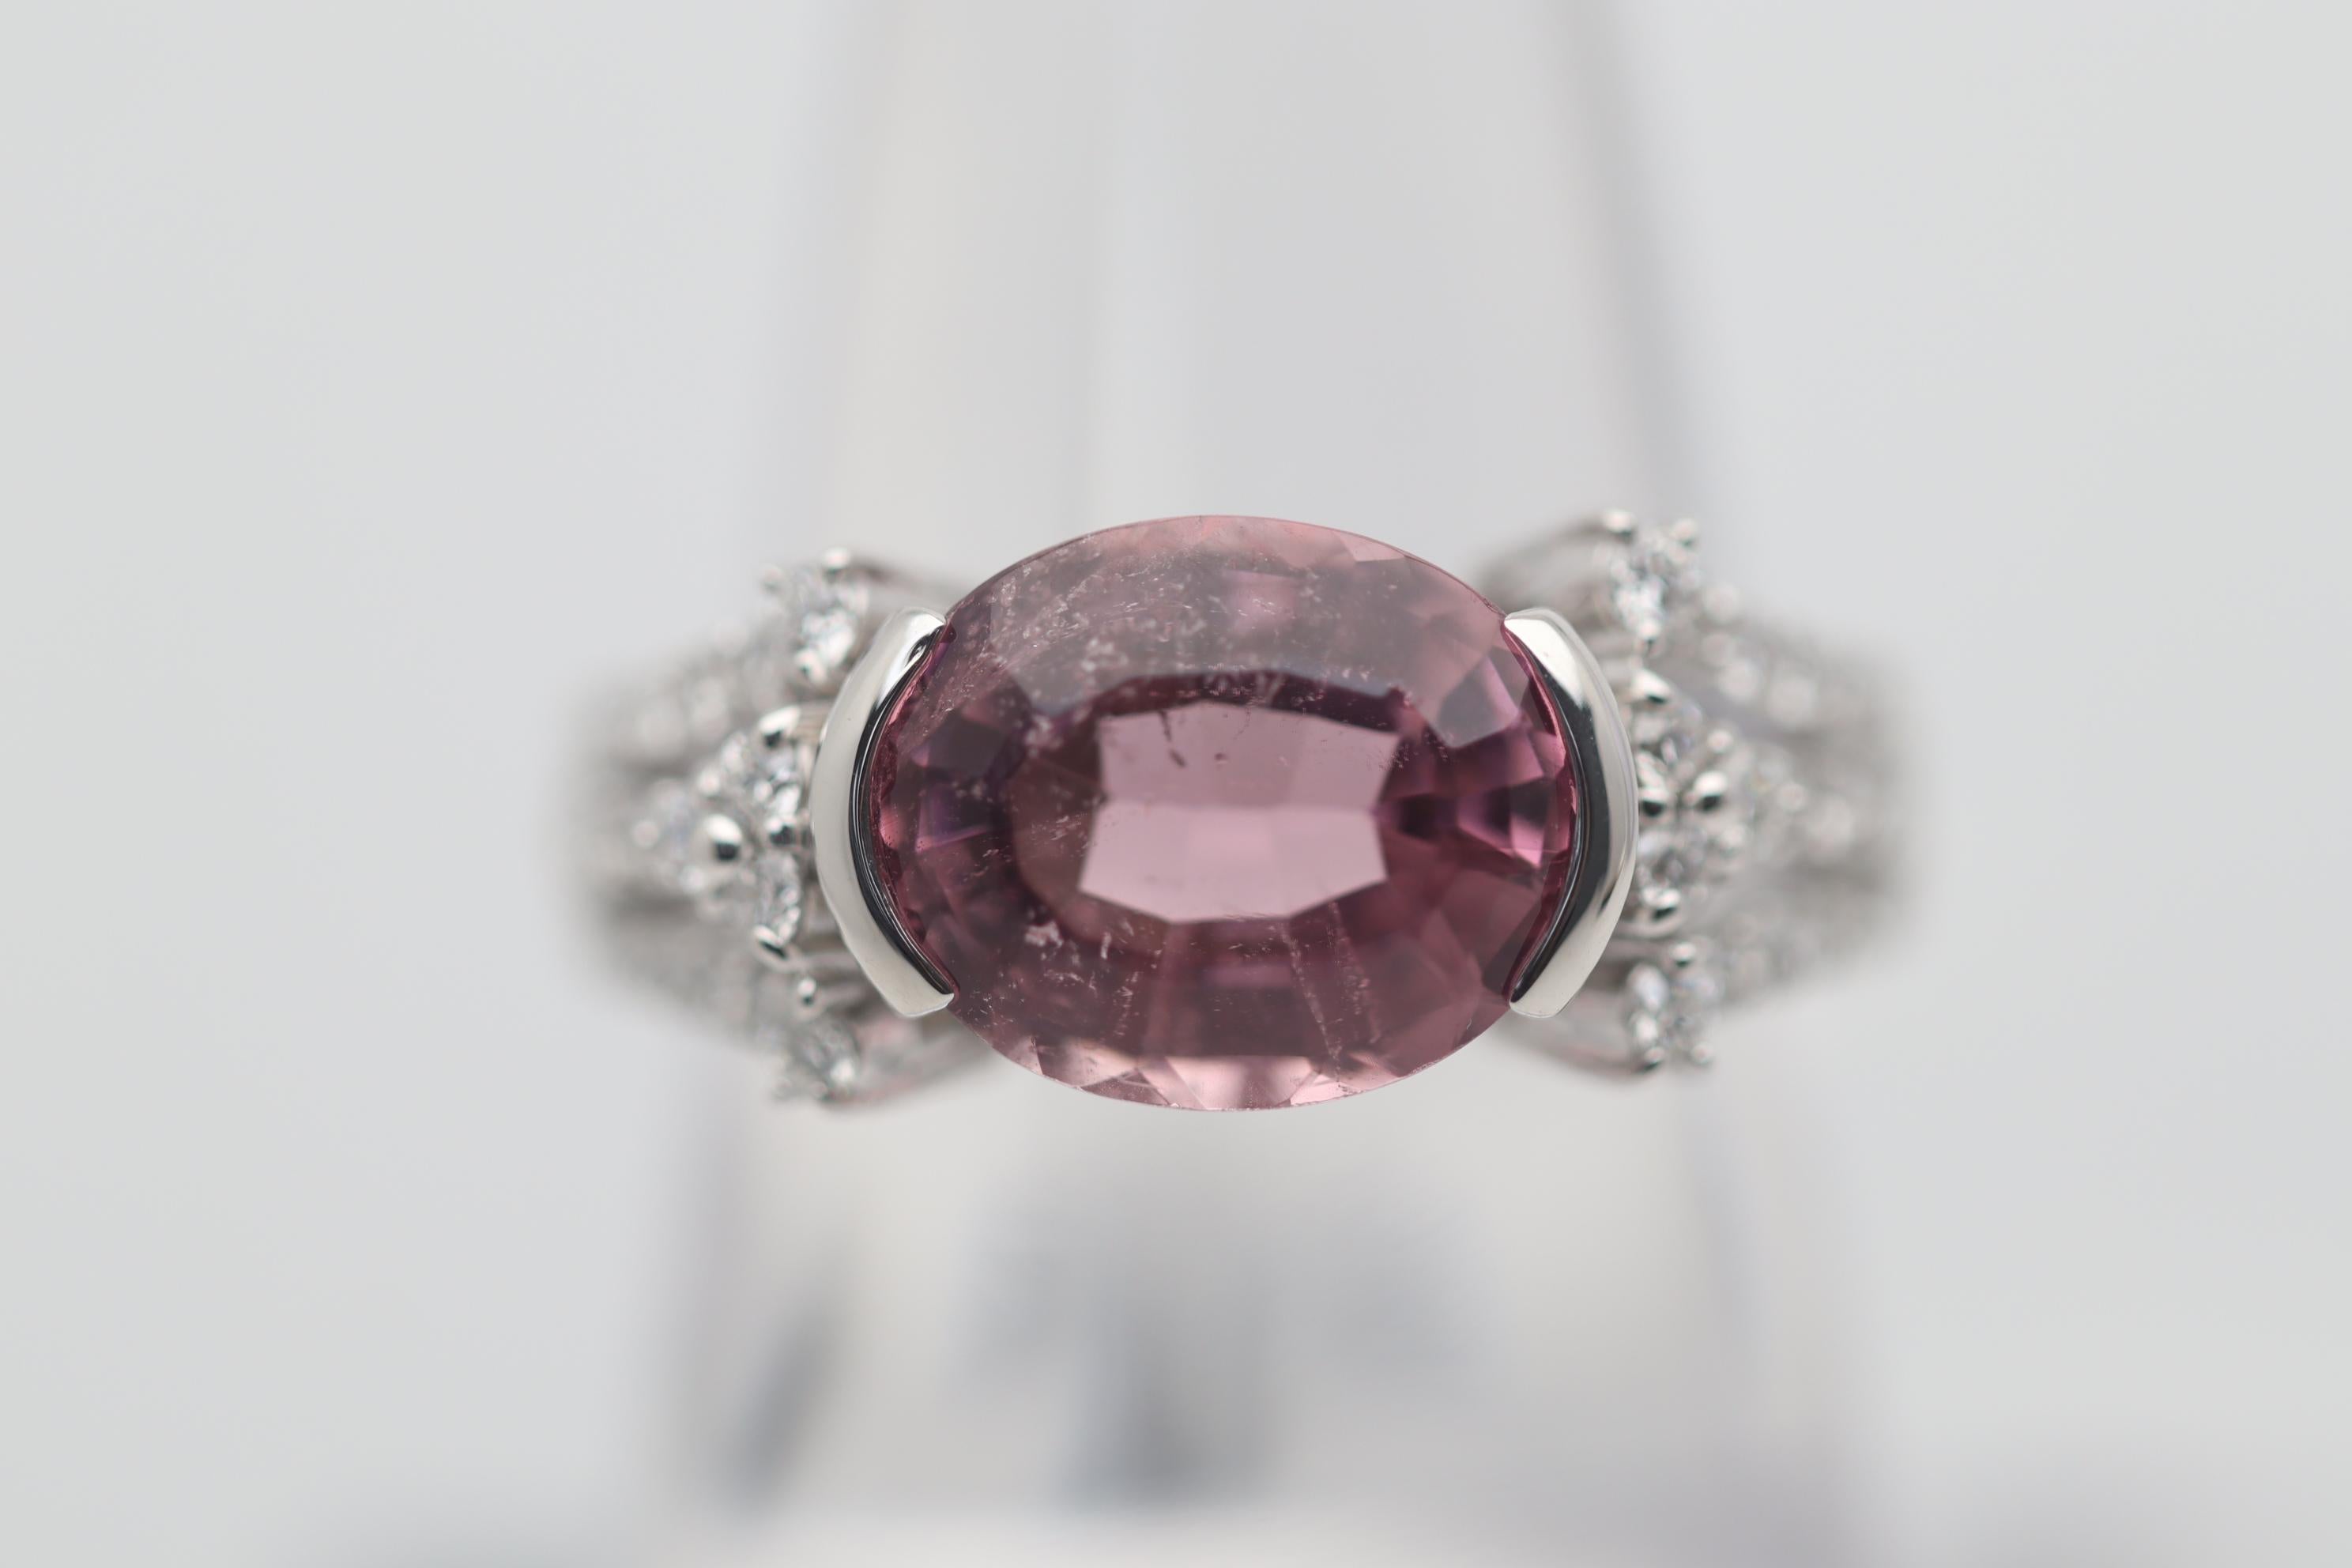 A sweet and stylish ring featuring a lovely pink tourmaline. It weighs 6 carats and has a rich pink color along with a unique step-cut on its crown. Complementing the tourmaline are 0.60 carats of round brilliant-cut diamonds set down the sides of